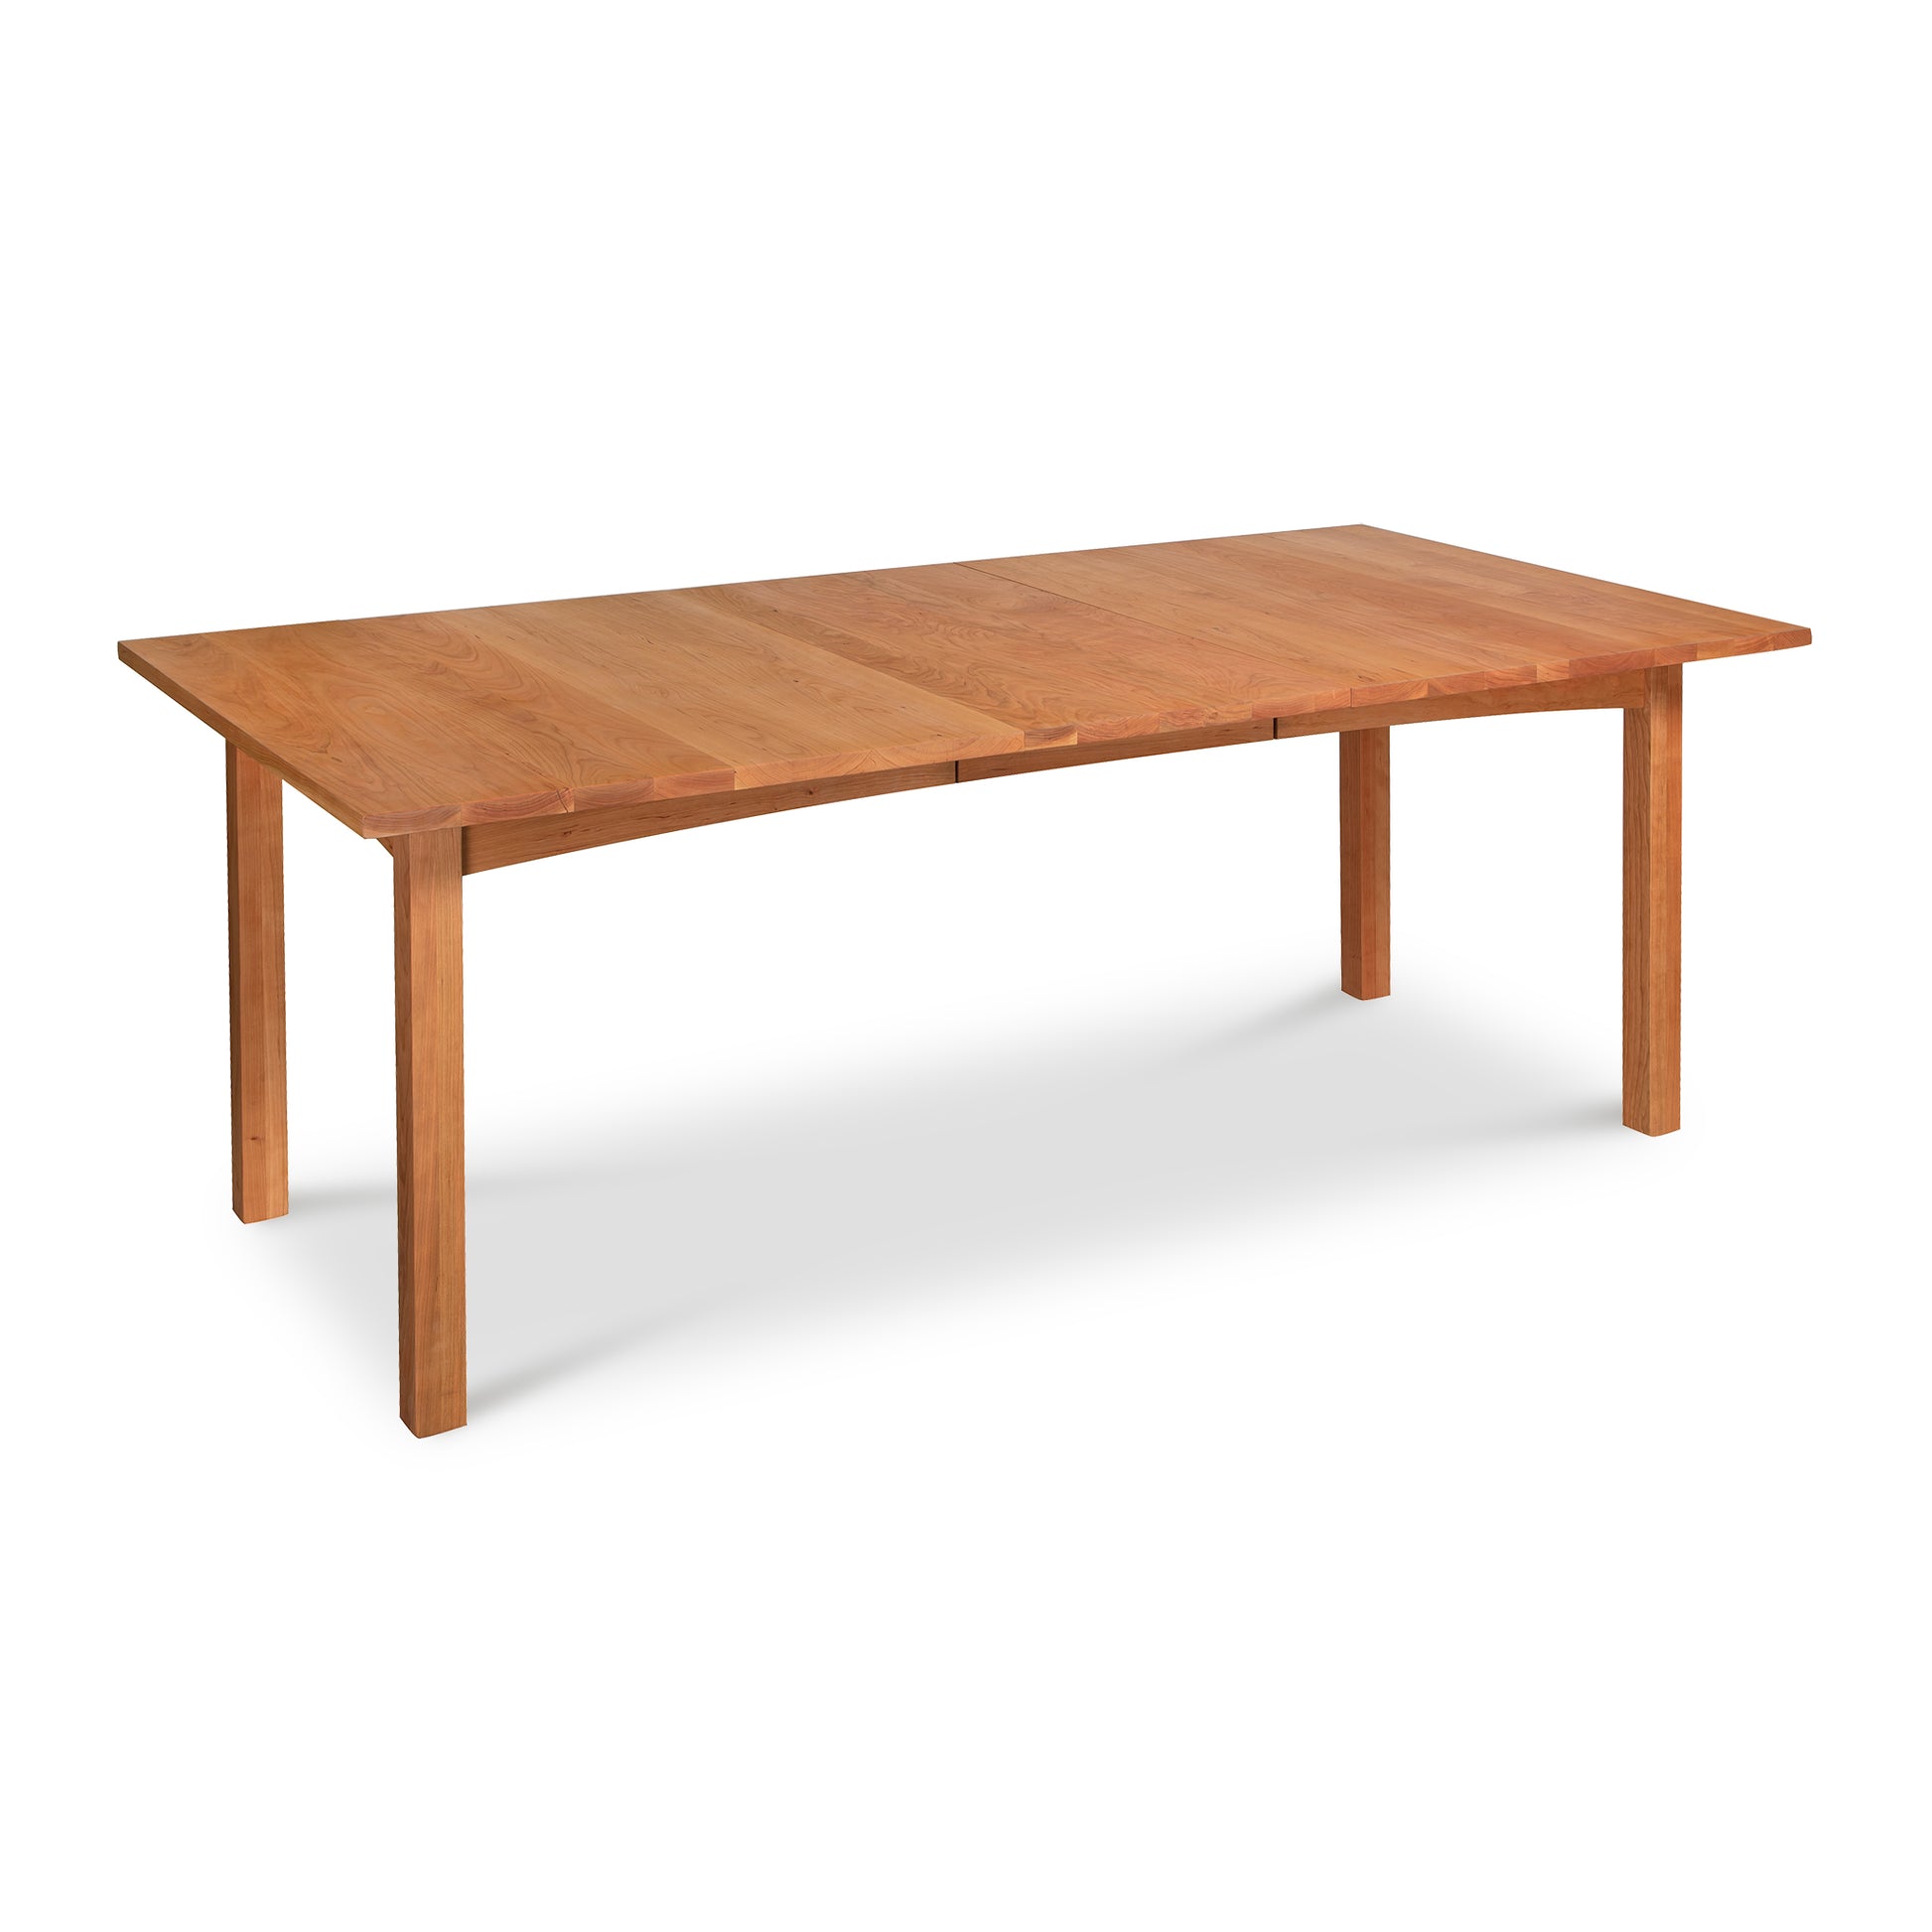 A Vermont Furniture Designs Burlington Shaker Extension Dining Table, crafted from solid woods, with four legs, isolated on a white background.